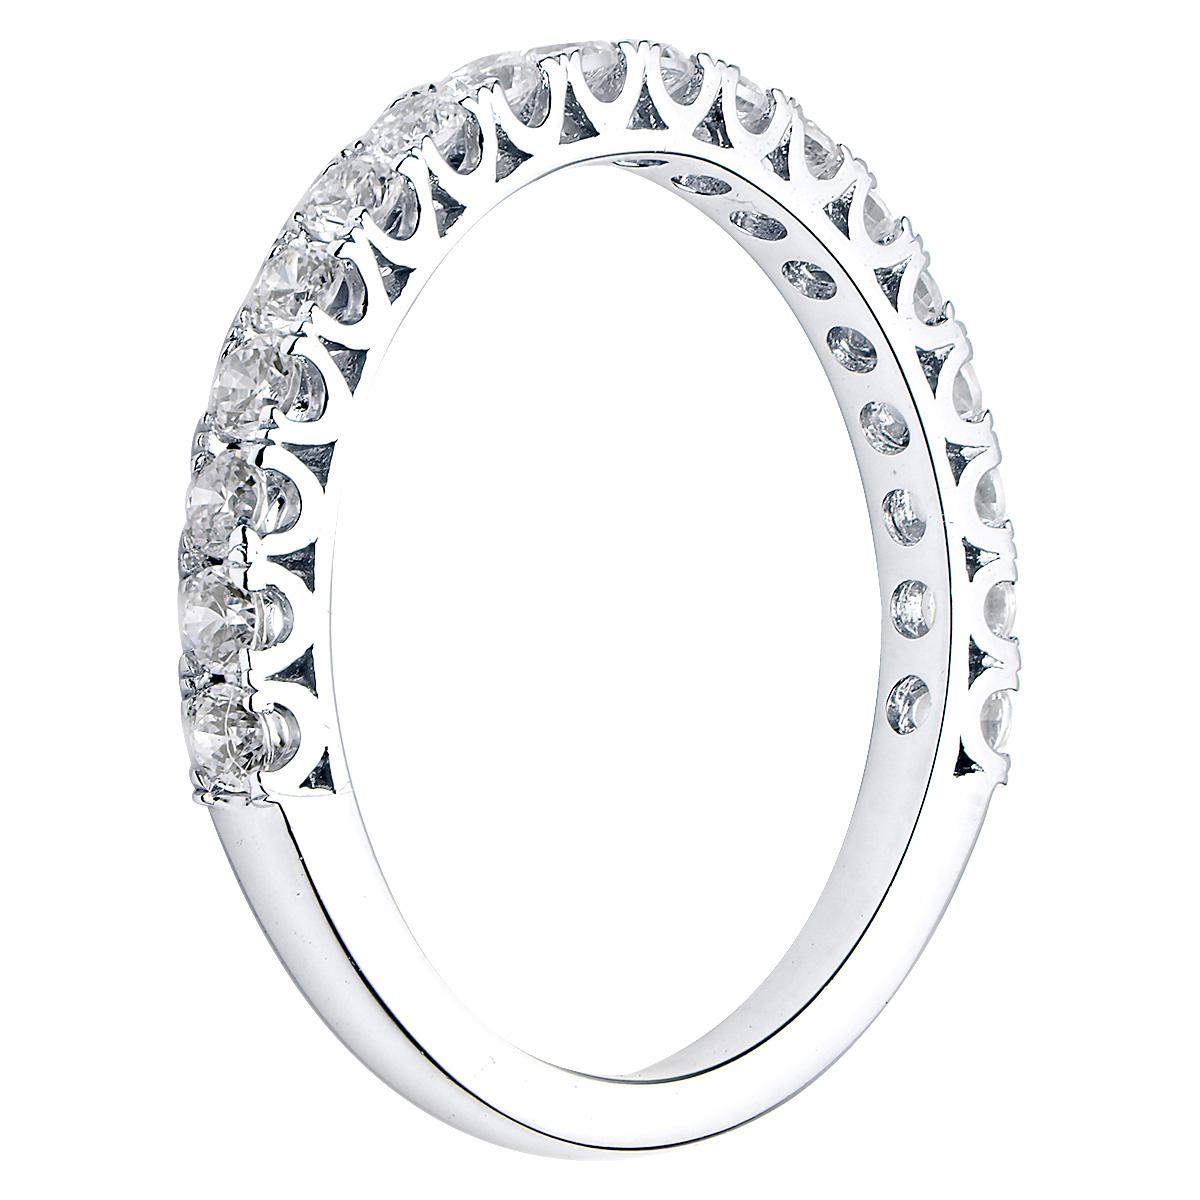 This beautiful classic diamond band has diamonds approximately 2/3 the way around the band that are secured with beautiful prongs. There are 18 round VS2, G color diamonds totaling 0.52 carats which are set in 2 grams of 18 karat white gold. This